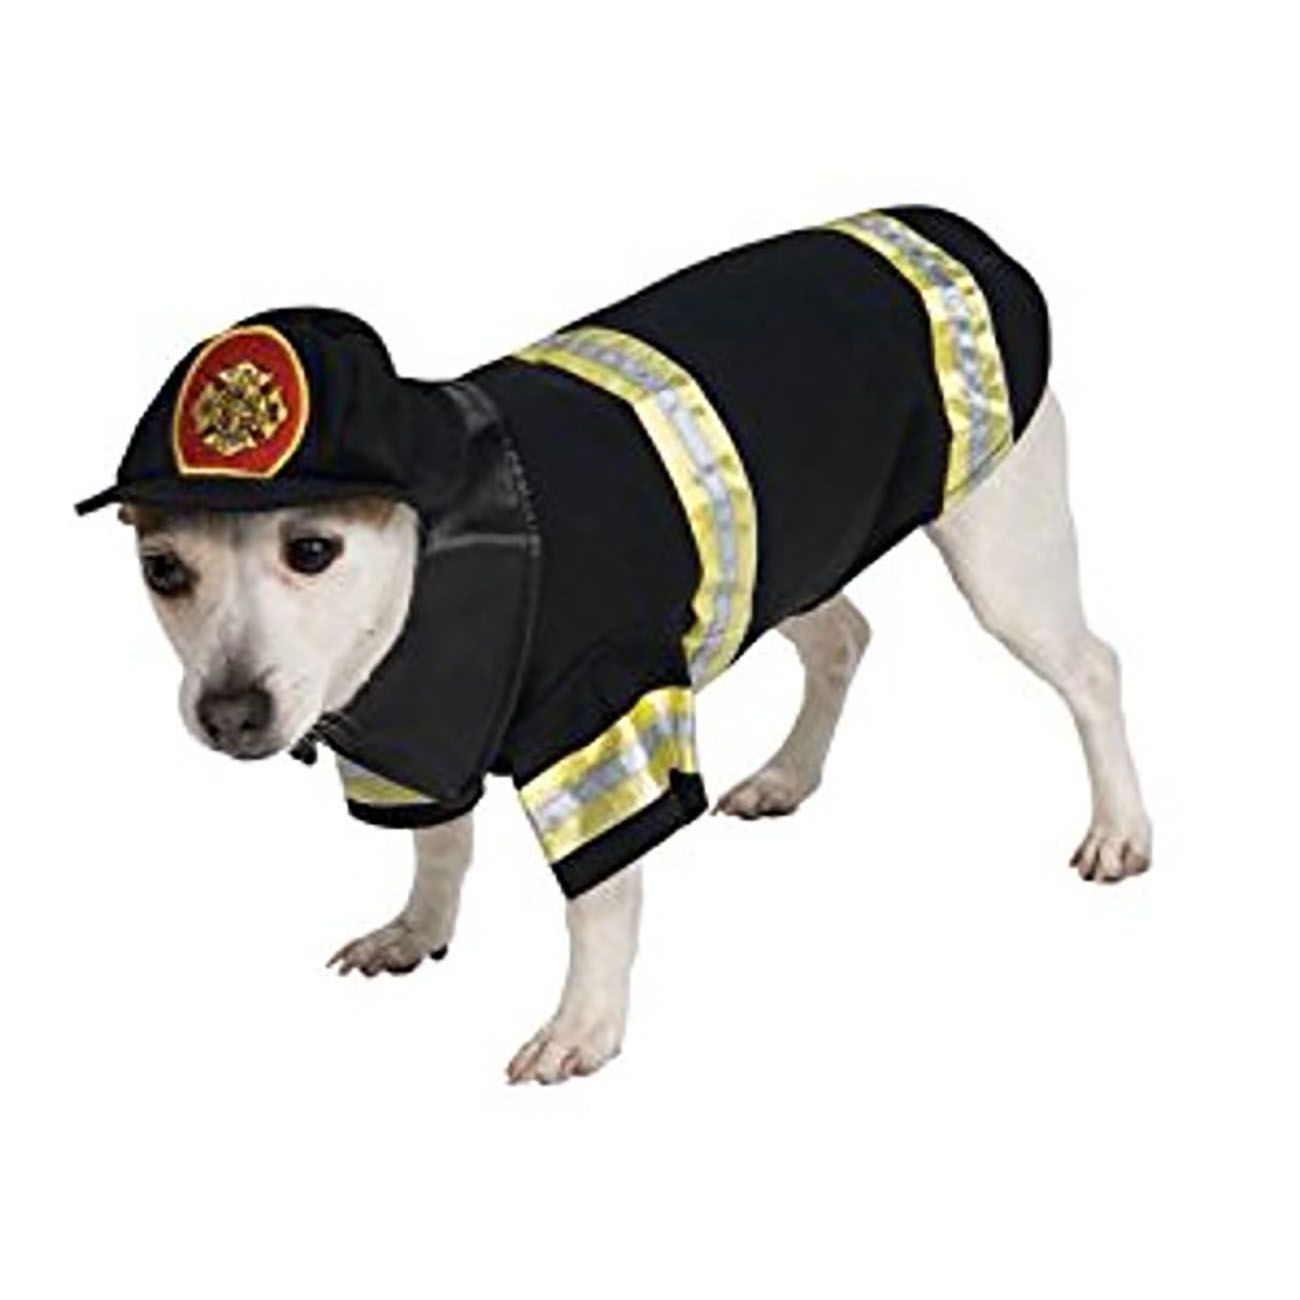 fire fighter dog costume